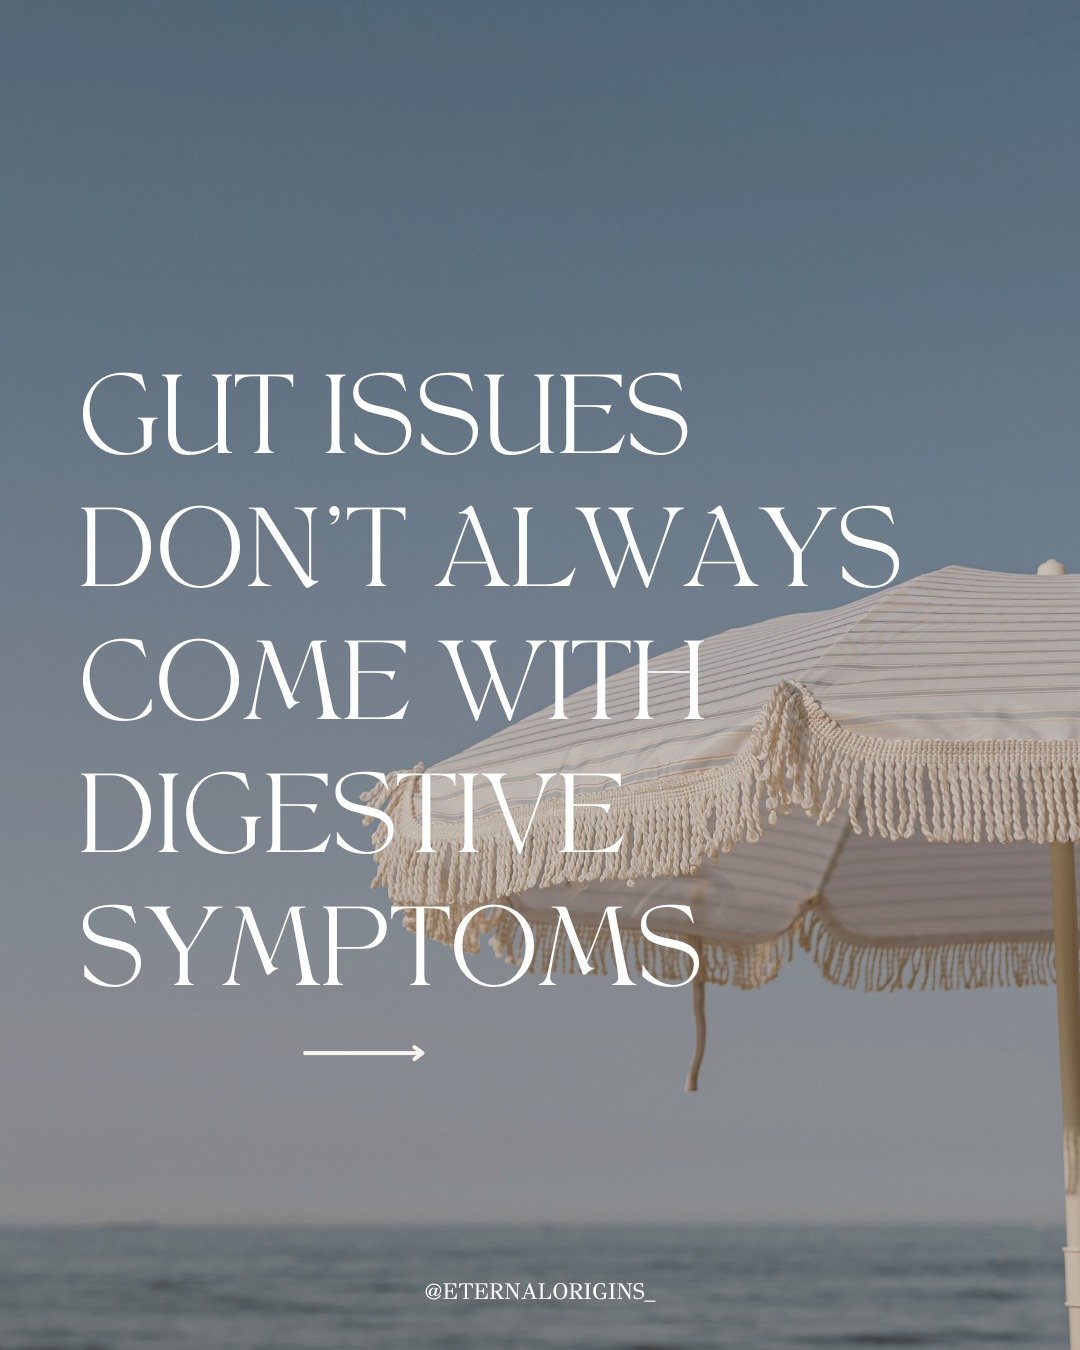 It's important to understand that our body functions as a whole, rather than separate parts. 

🧐 Let's take a closer look at the gut and its impact on our overall health. 

Did you know that gut issues don't always come with digestive symptoms? 

Th